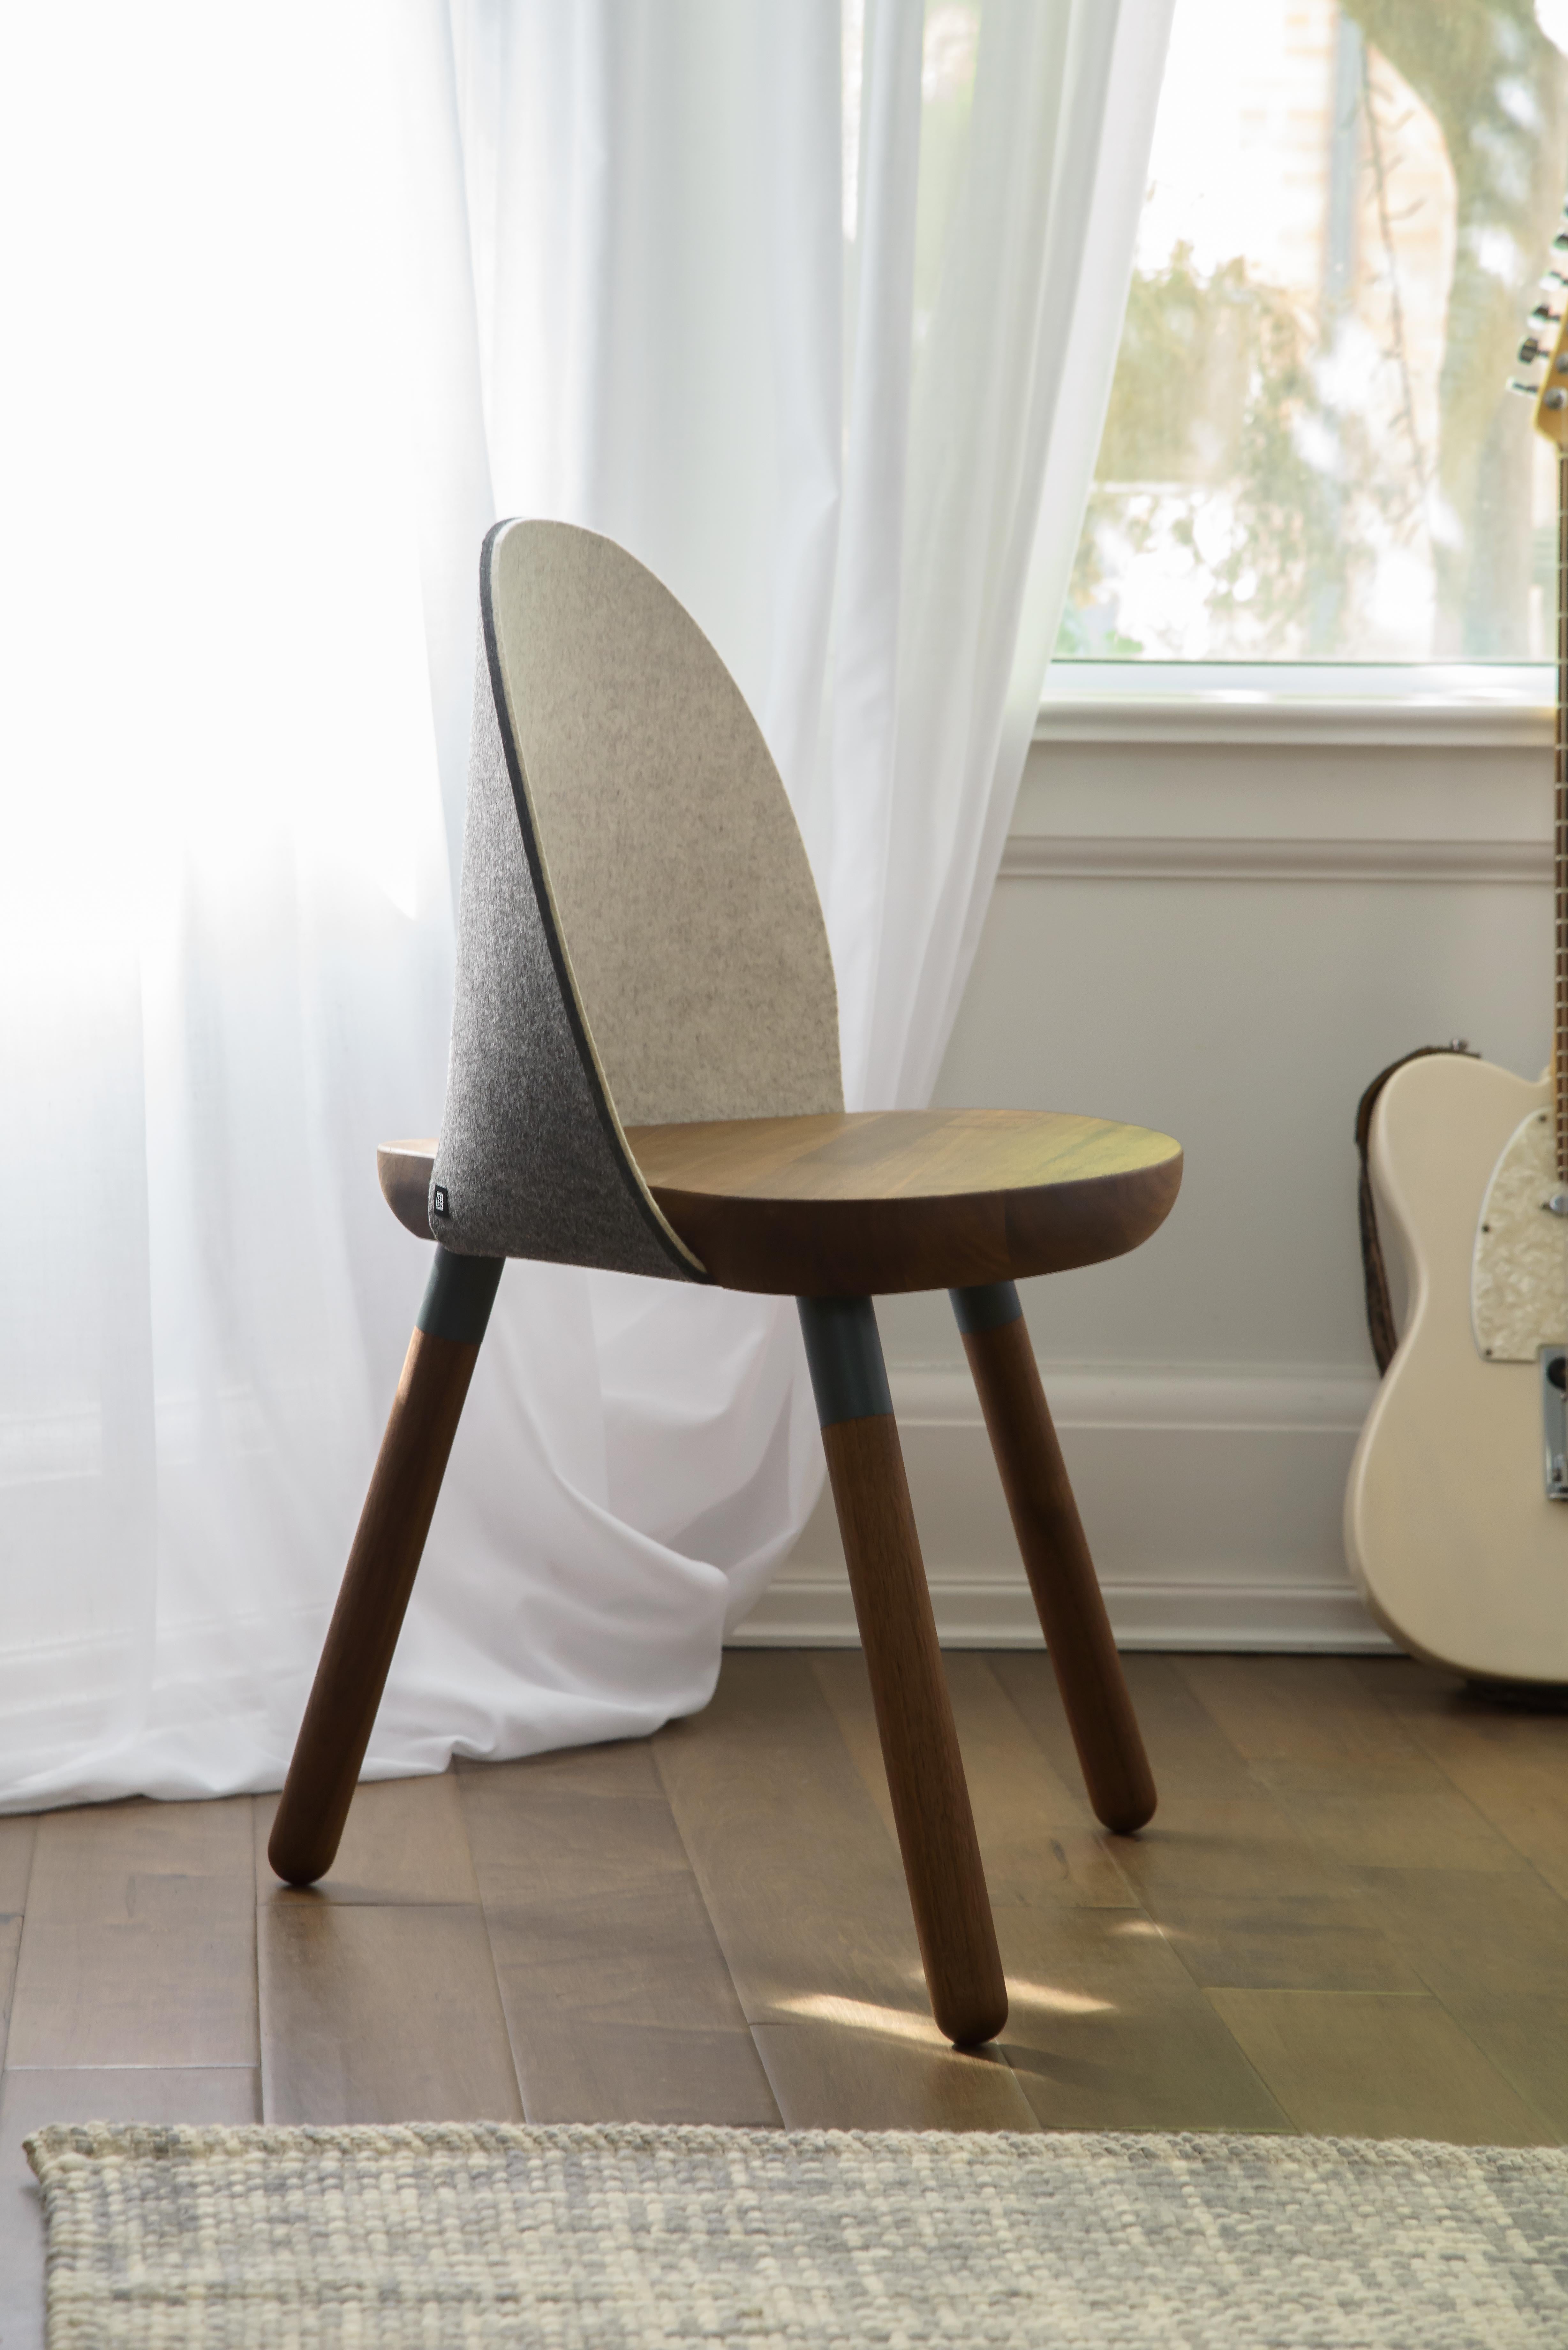 Oiled Cinch Chair, Melton Wool, Wood Seat and Eco-Friendly Powder Coated Steel Support For Sale